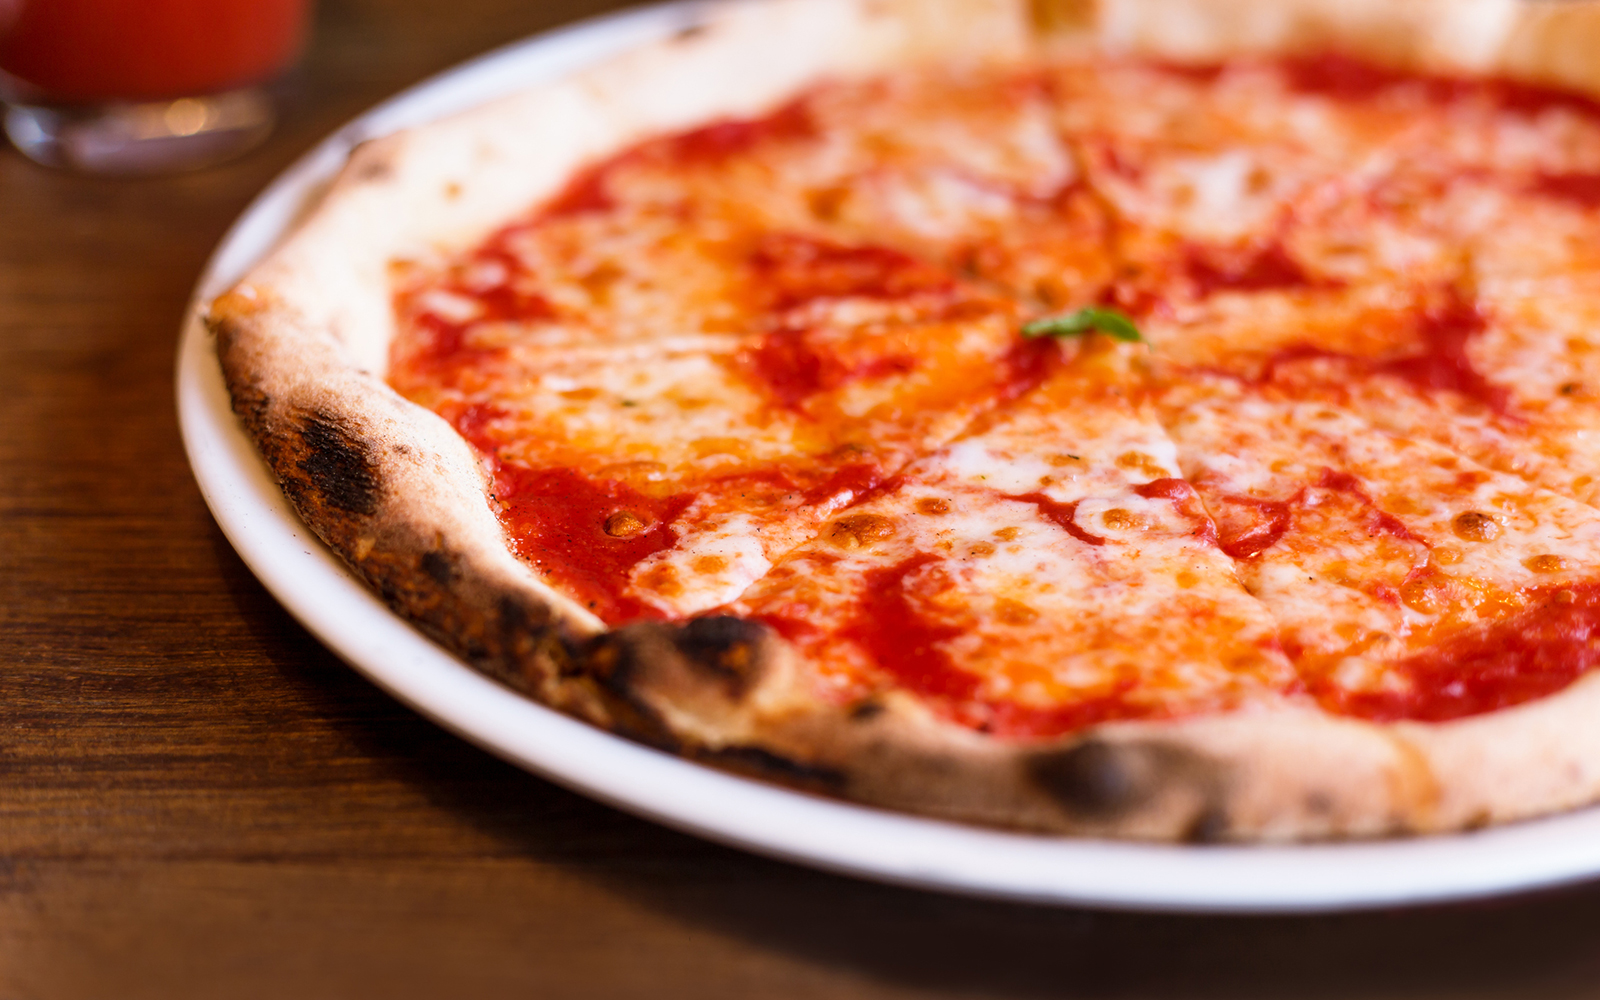 The City of Pizza returns to Rome from 12 to 14 April